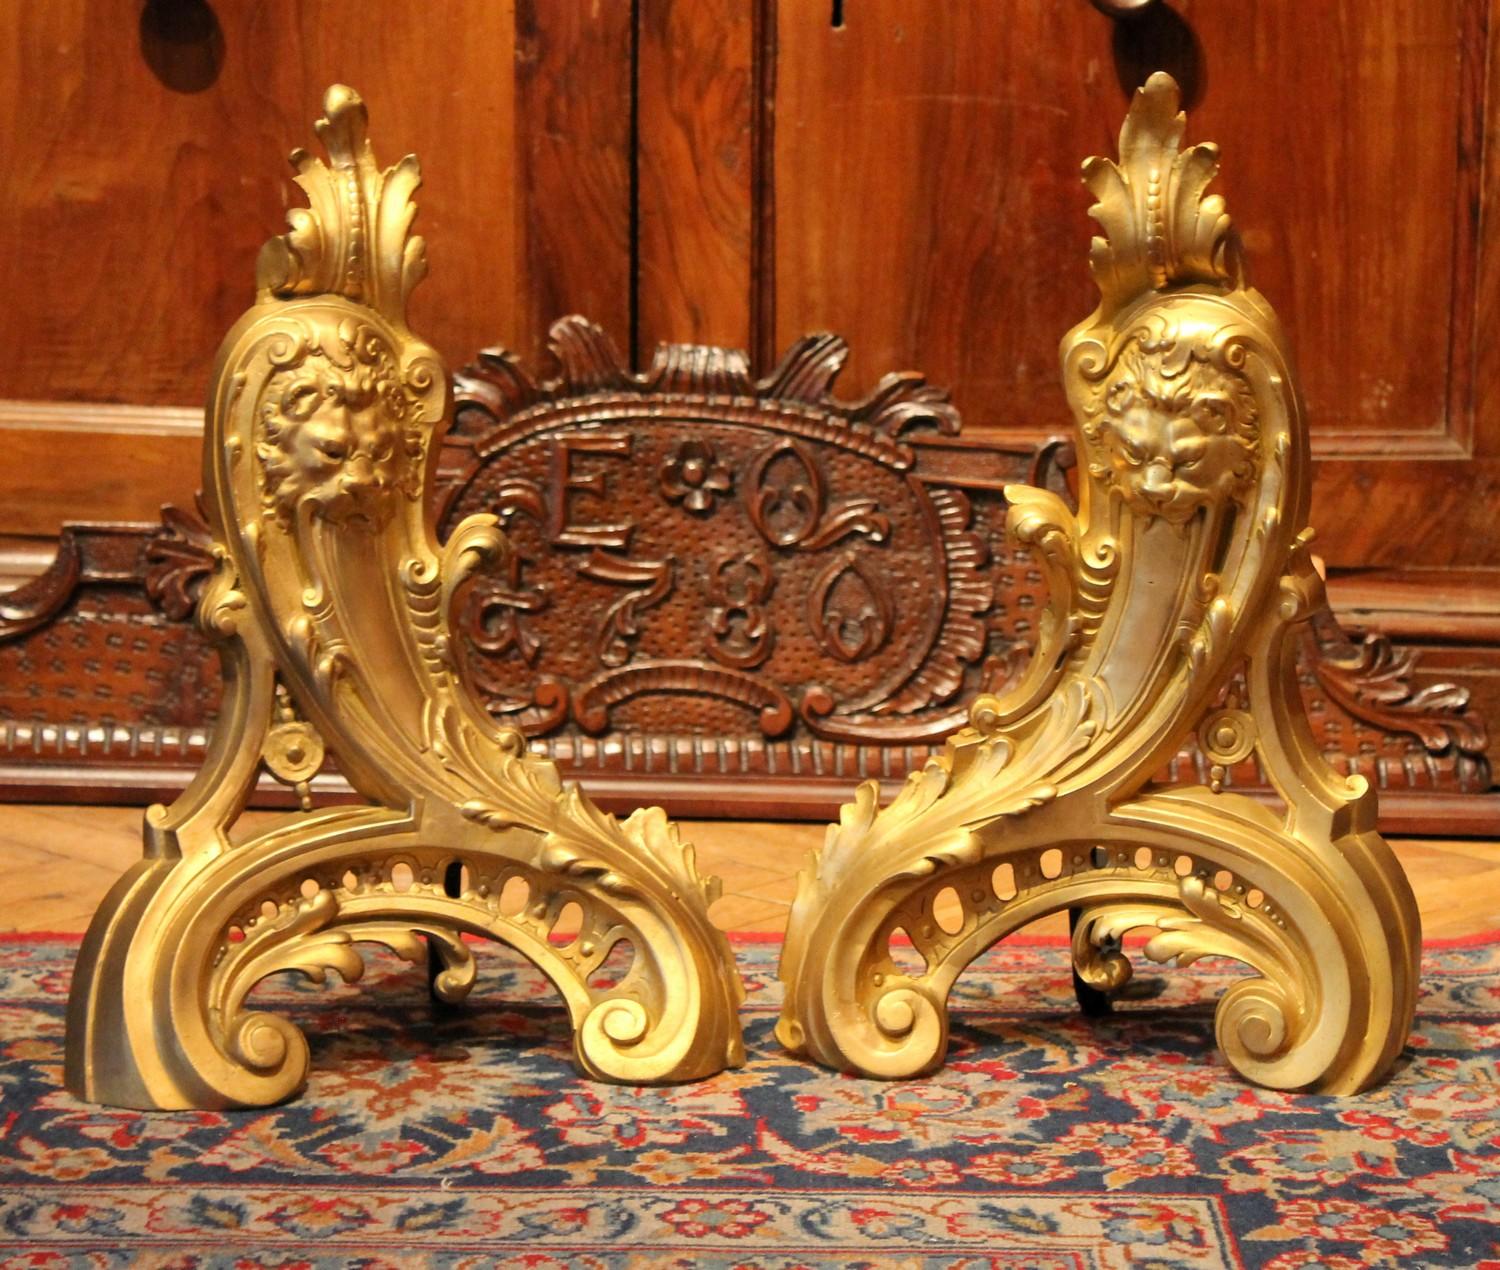 Impressive pair of French Louis XV style finely chiseled gilt bronze andirons. These Rocaille ormolu chenets are extremely decorative each depicting a lion’s head crafted in relief surrounded by rich Rococo decorations such as acanthus leaves,